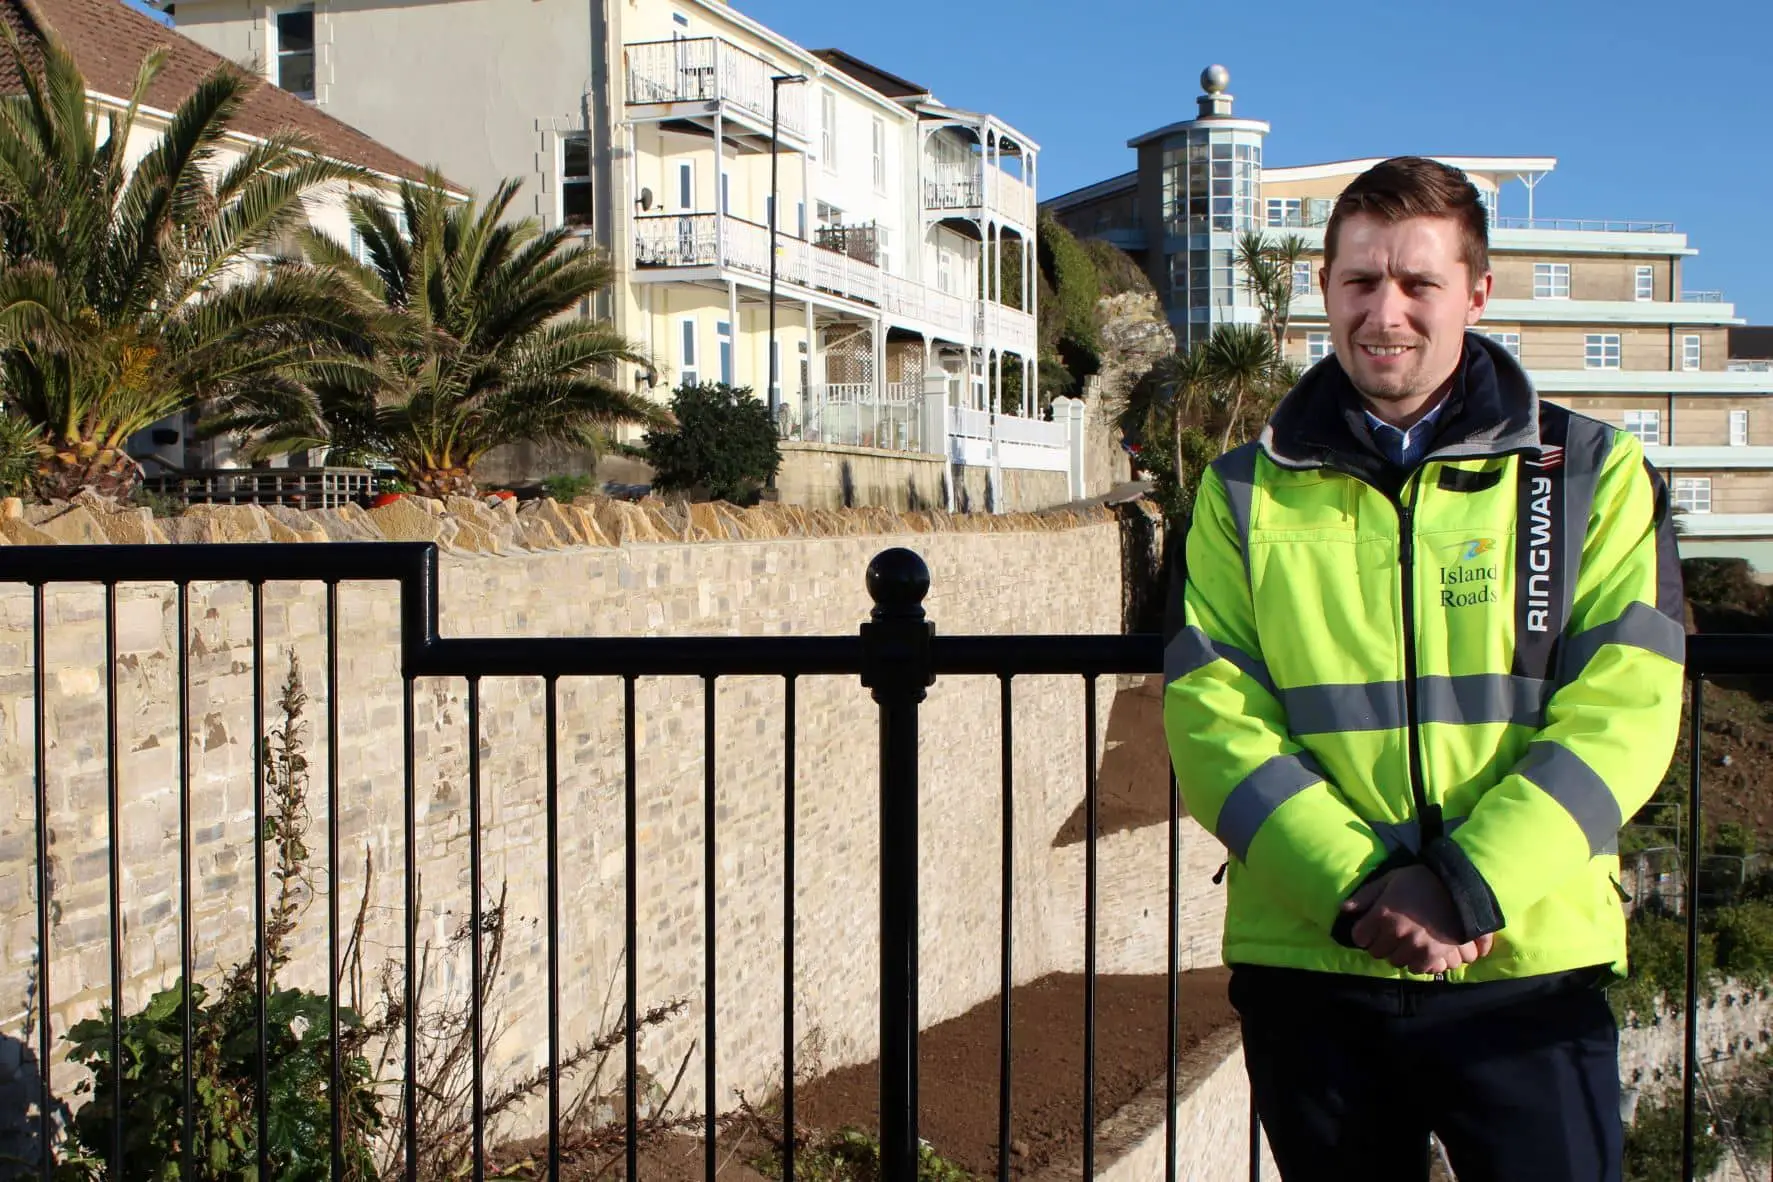 Jason Boulter, senior project manager for Island Roads